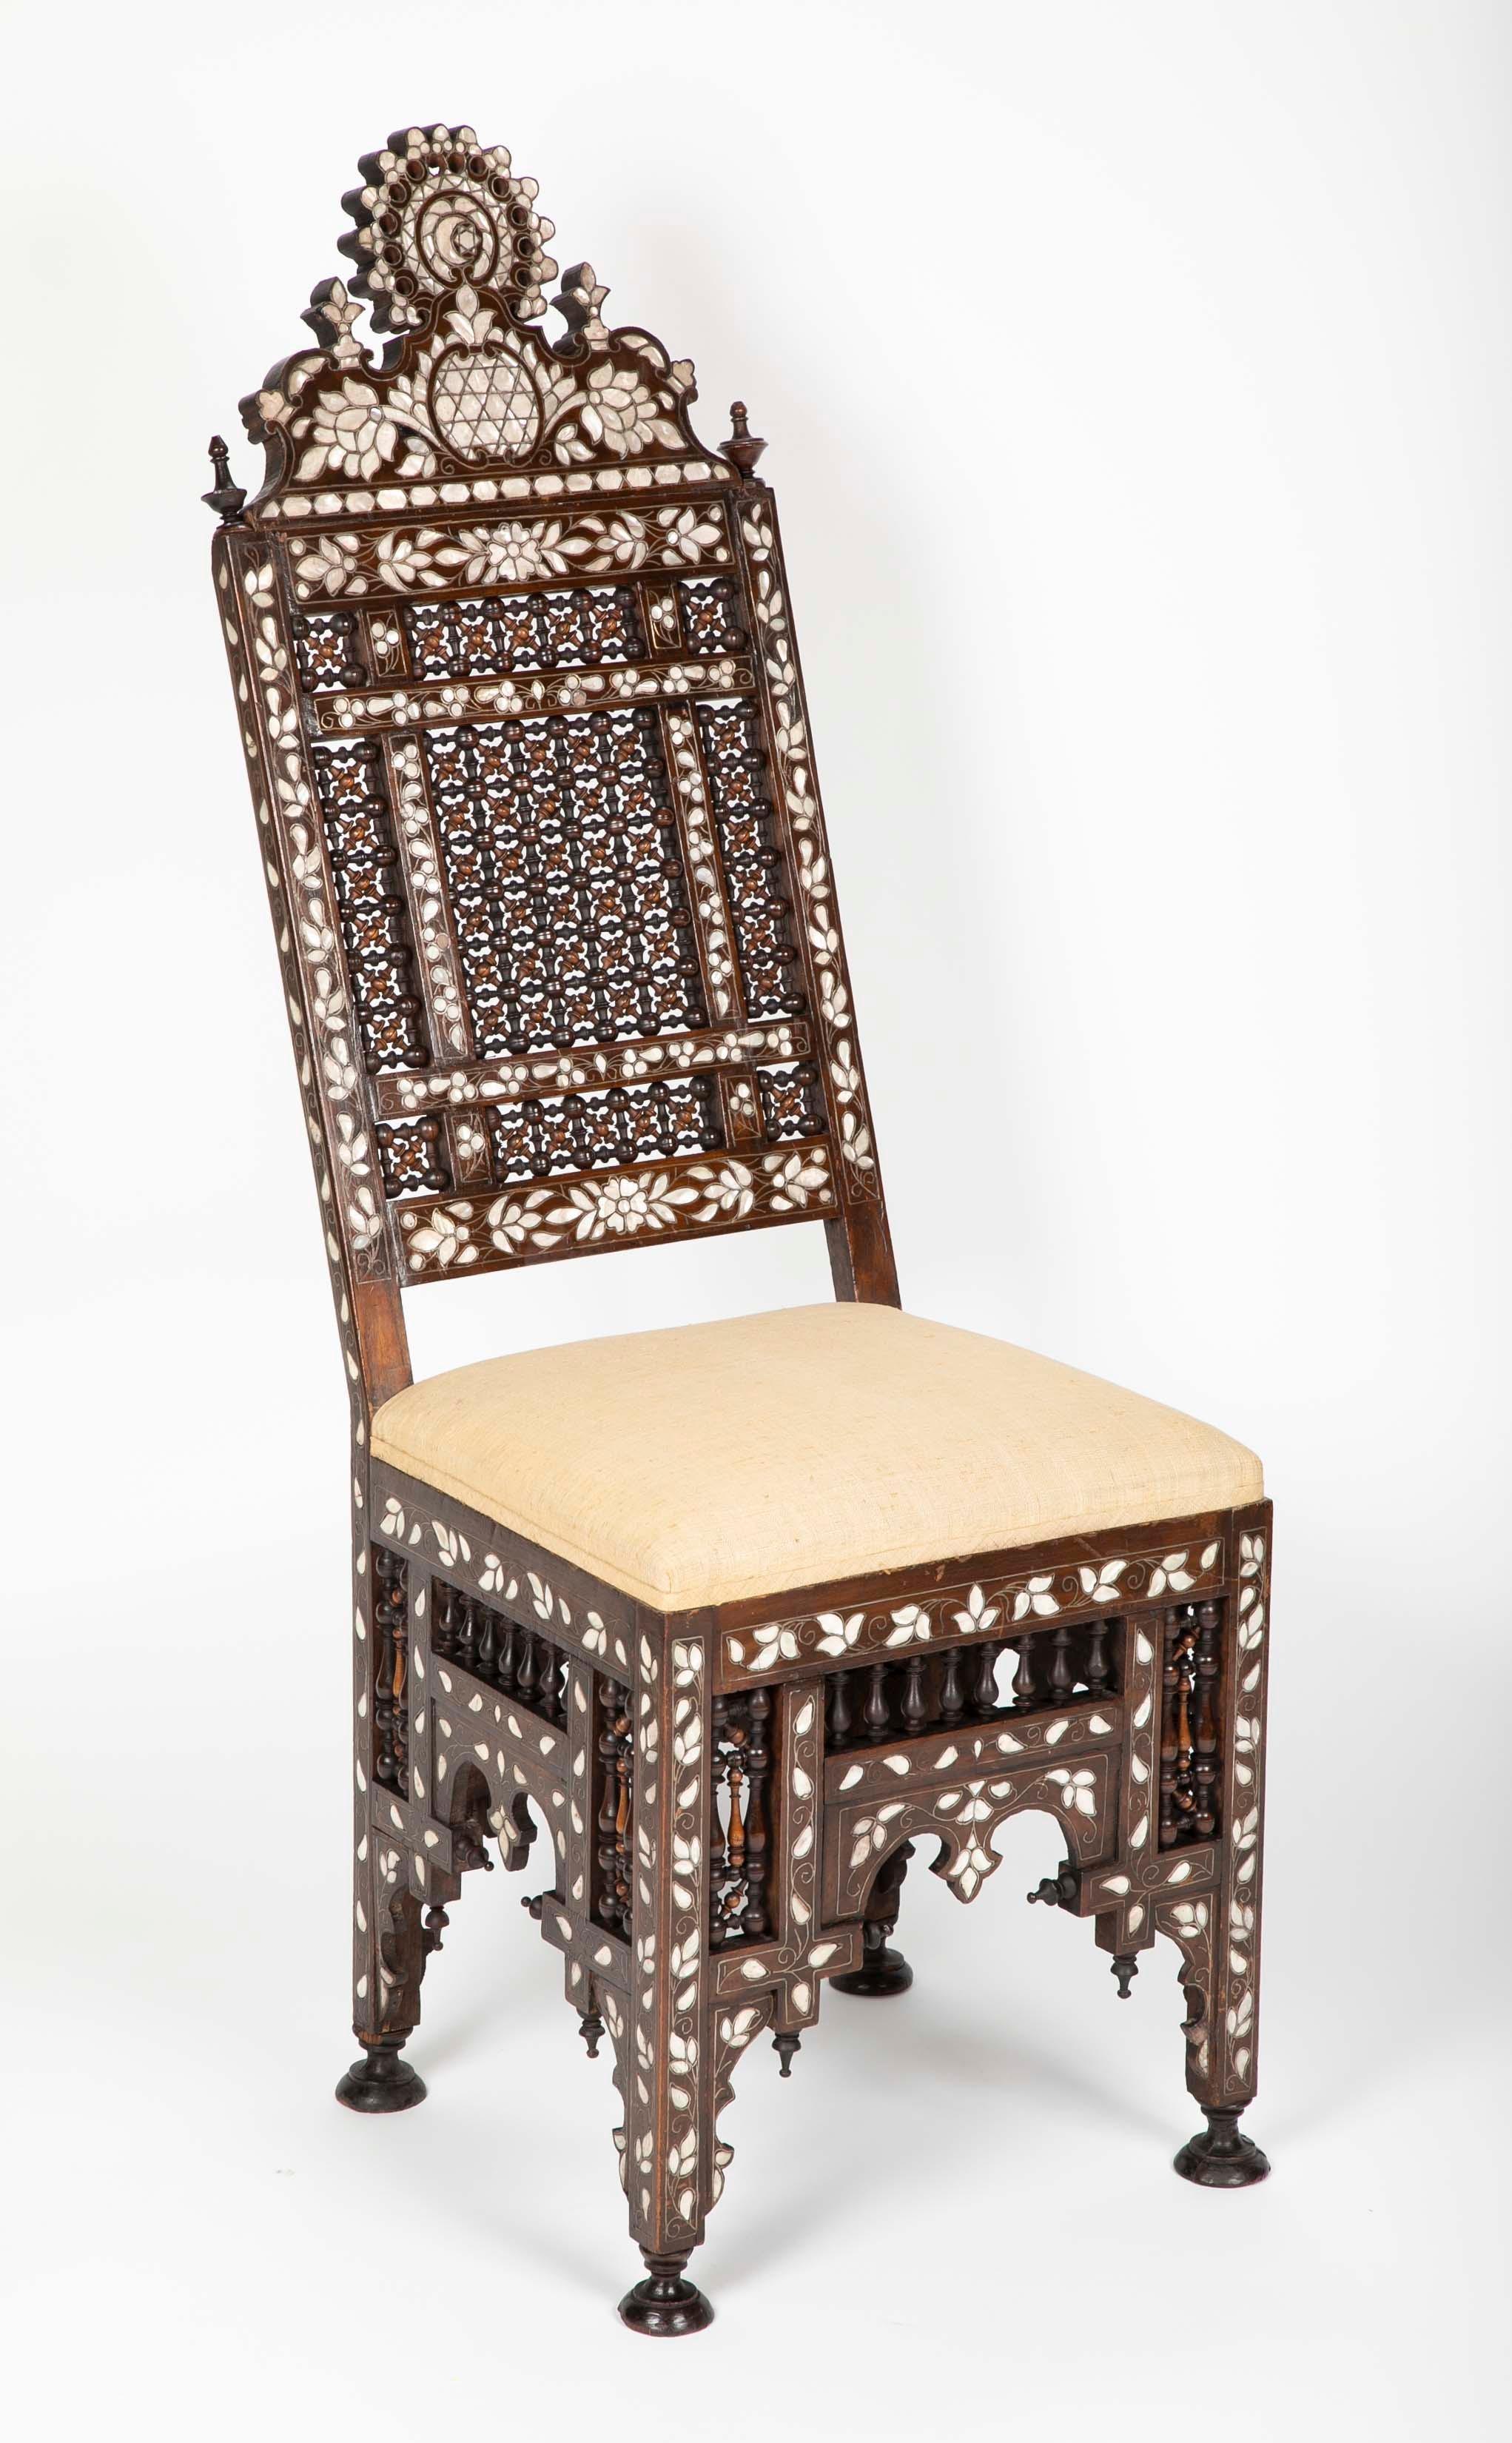 ancient persia queening chairs